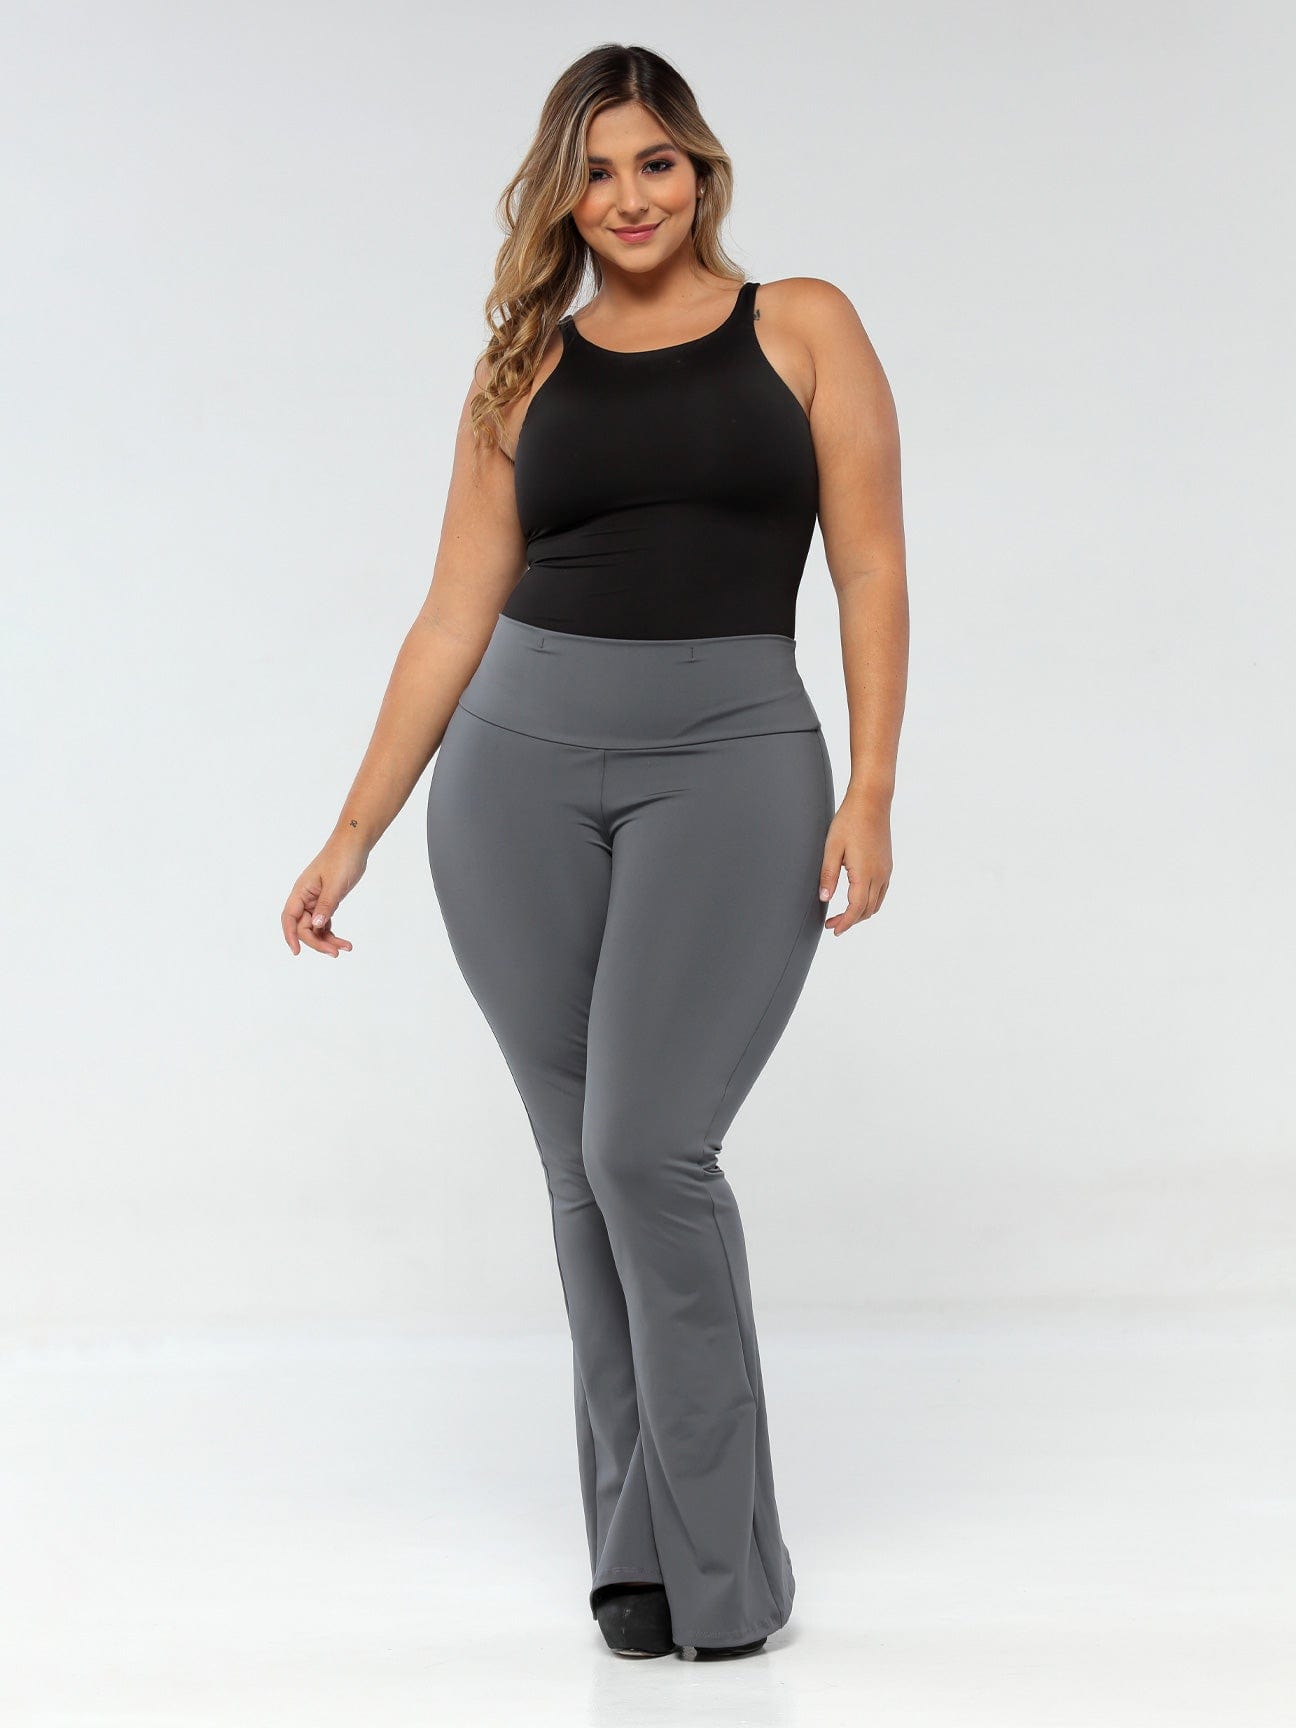 Miss Independent Butt Lift Flare Leggings with Tummy Control